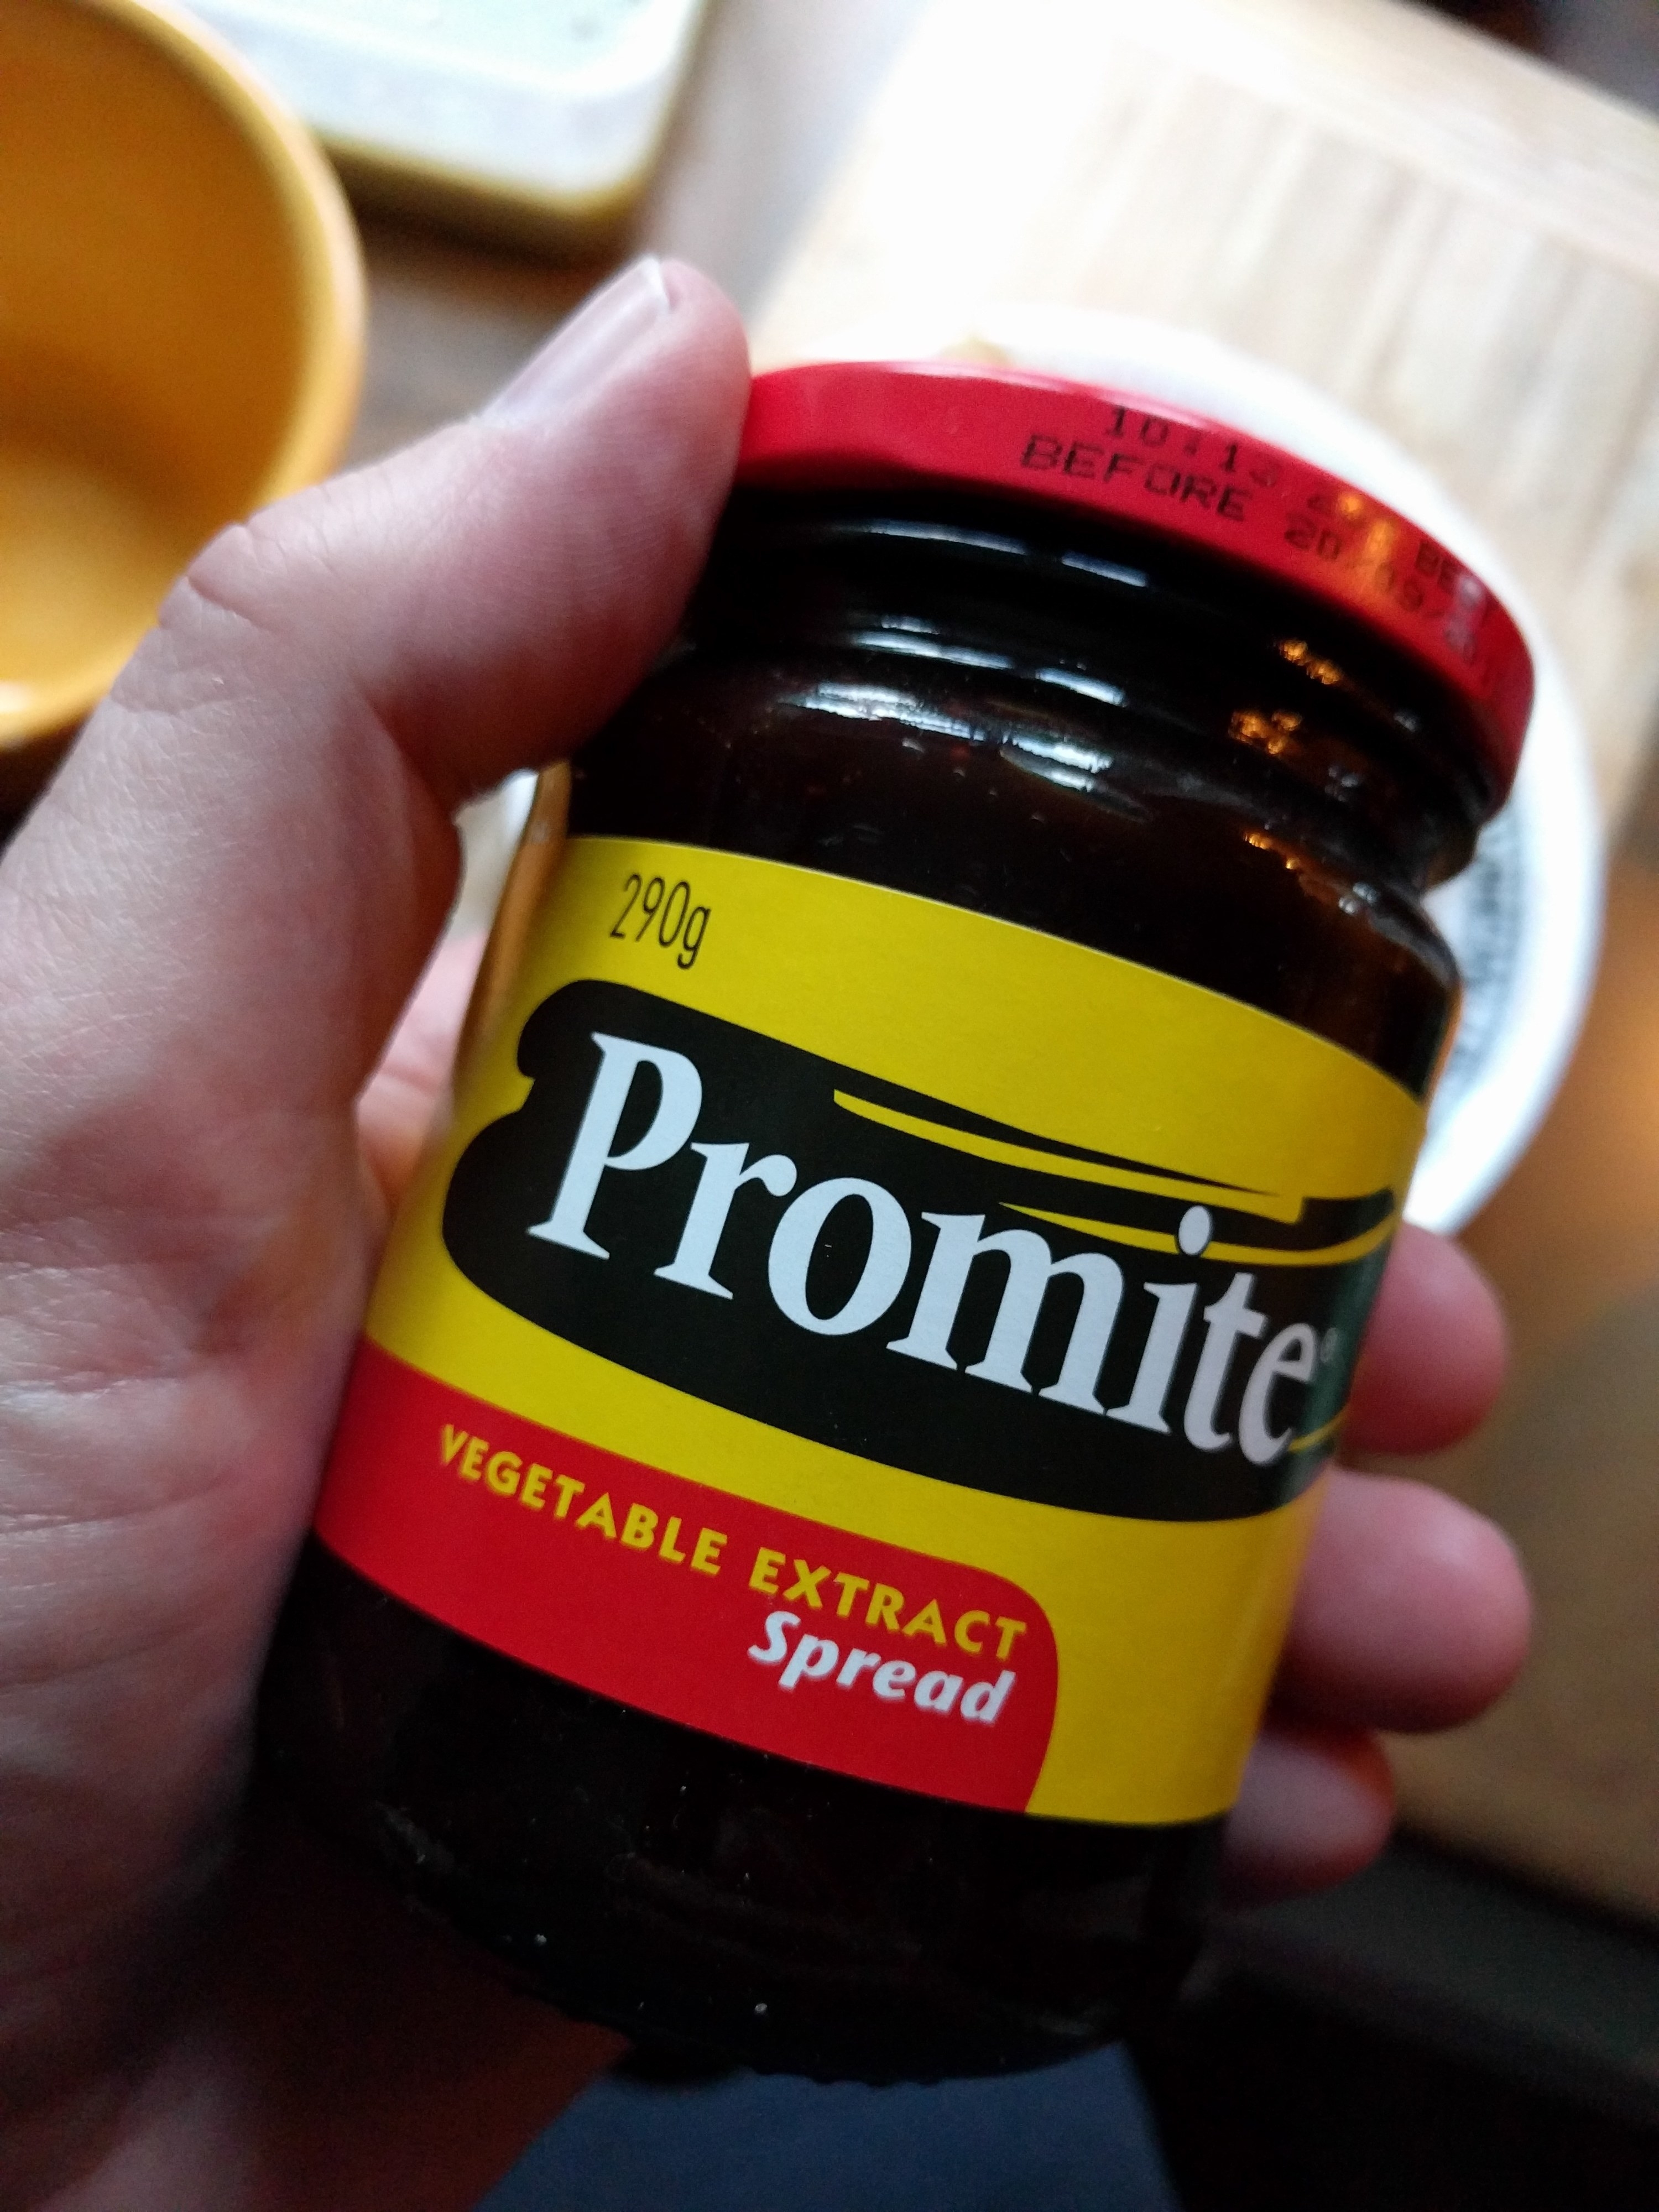 A hand holding a jar of Promite